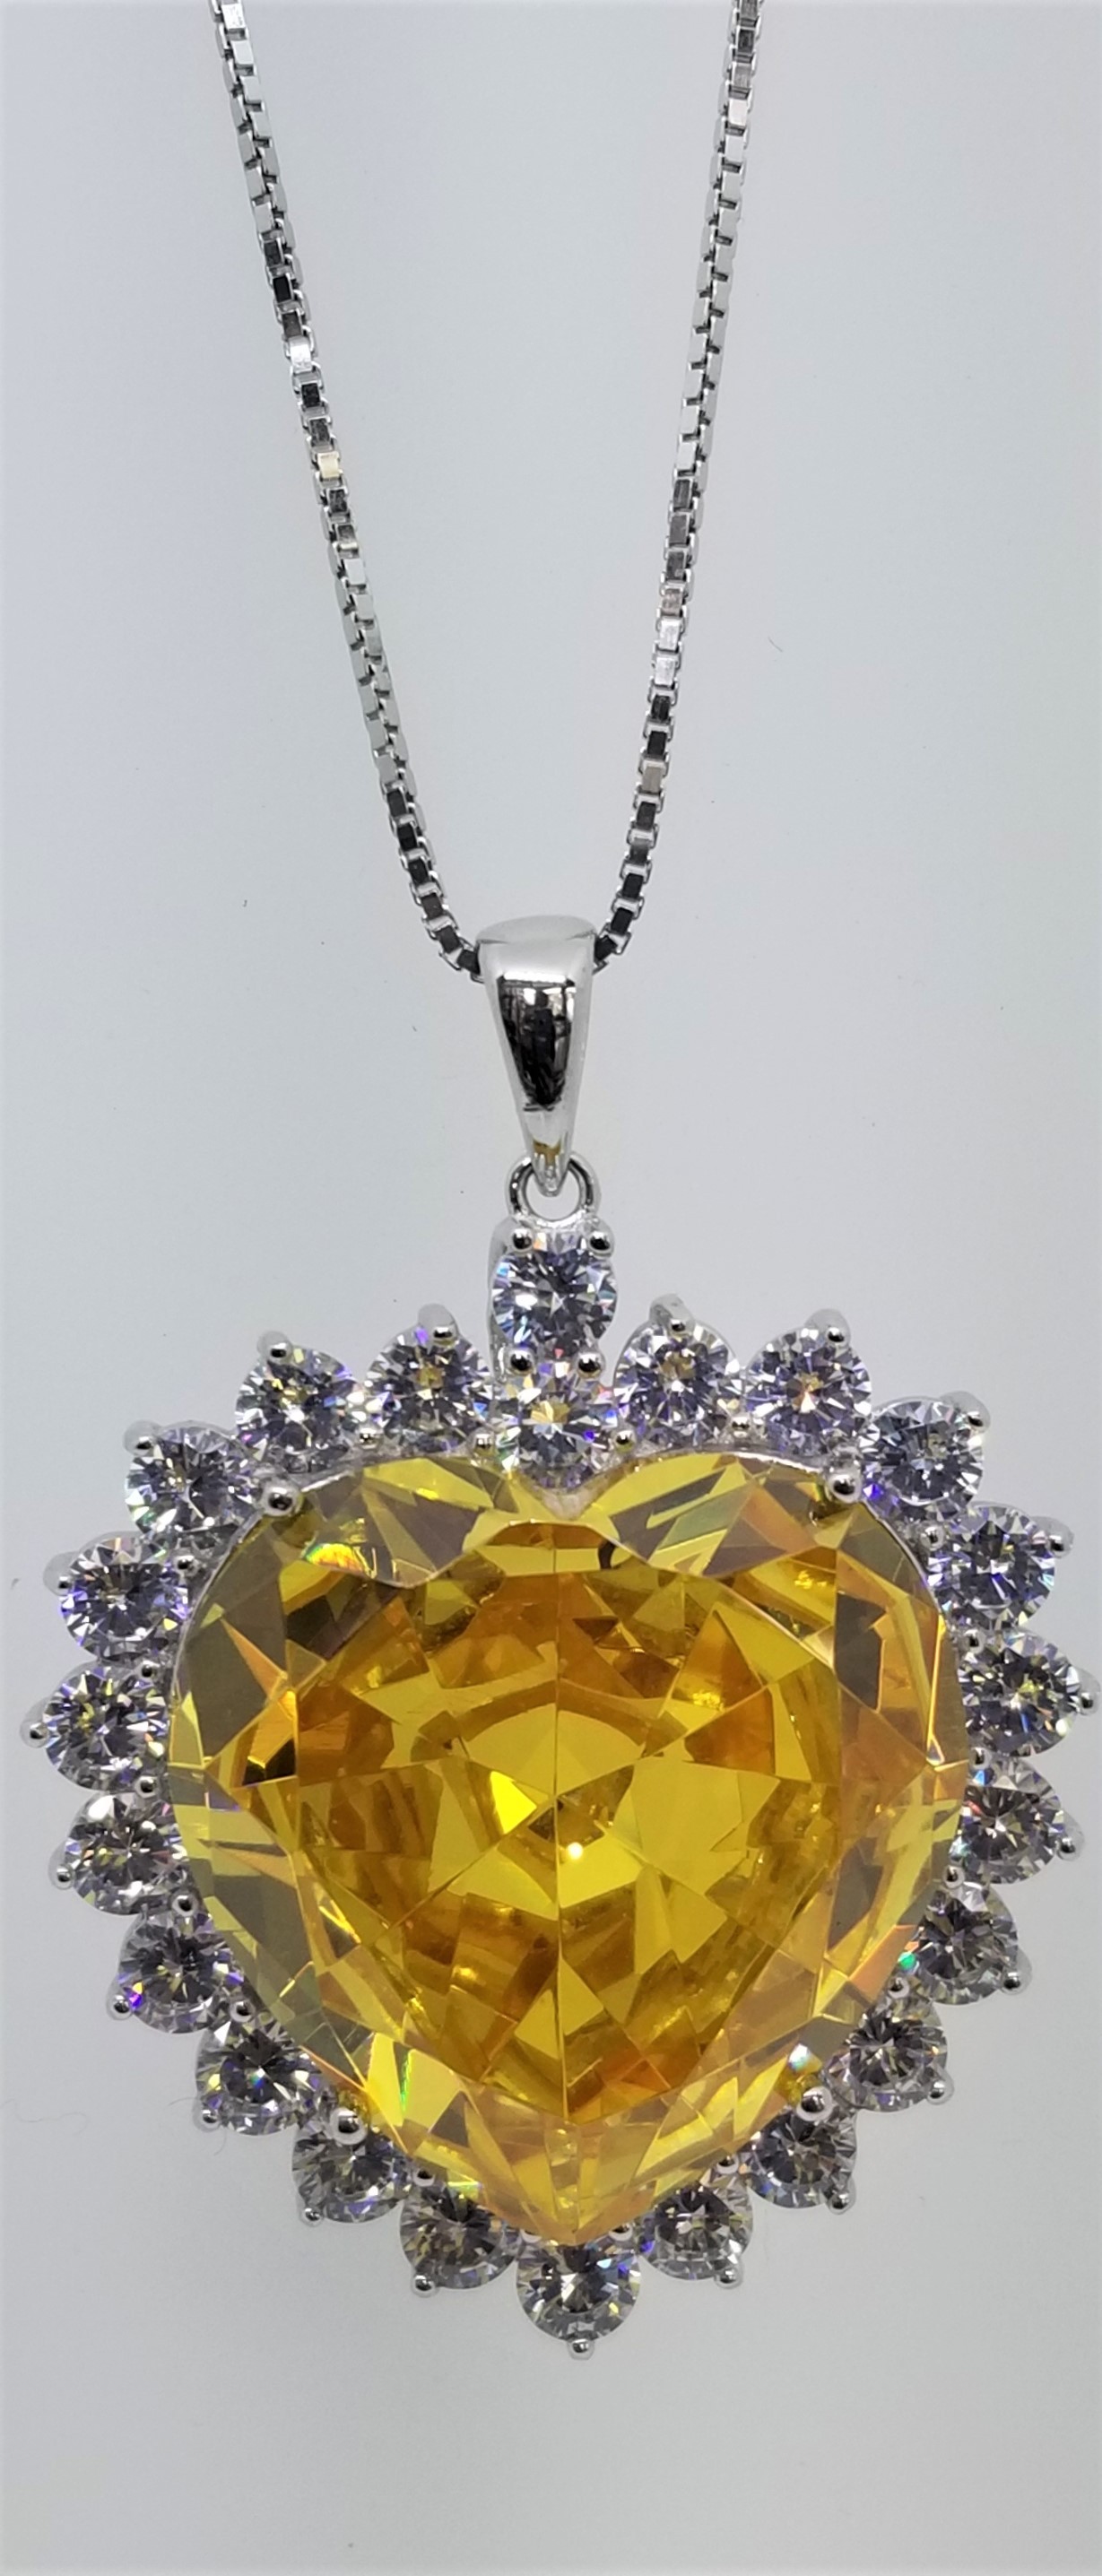 925 Sterling Silver Heart Pendant With Yellow Topaz And CZ